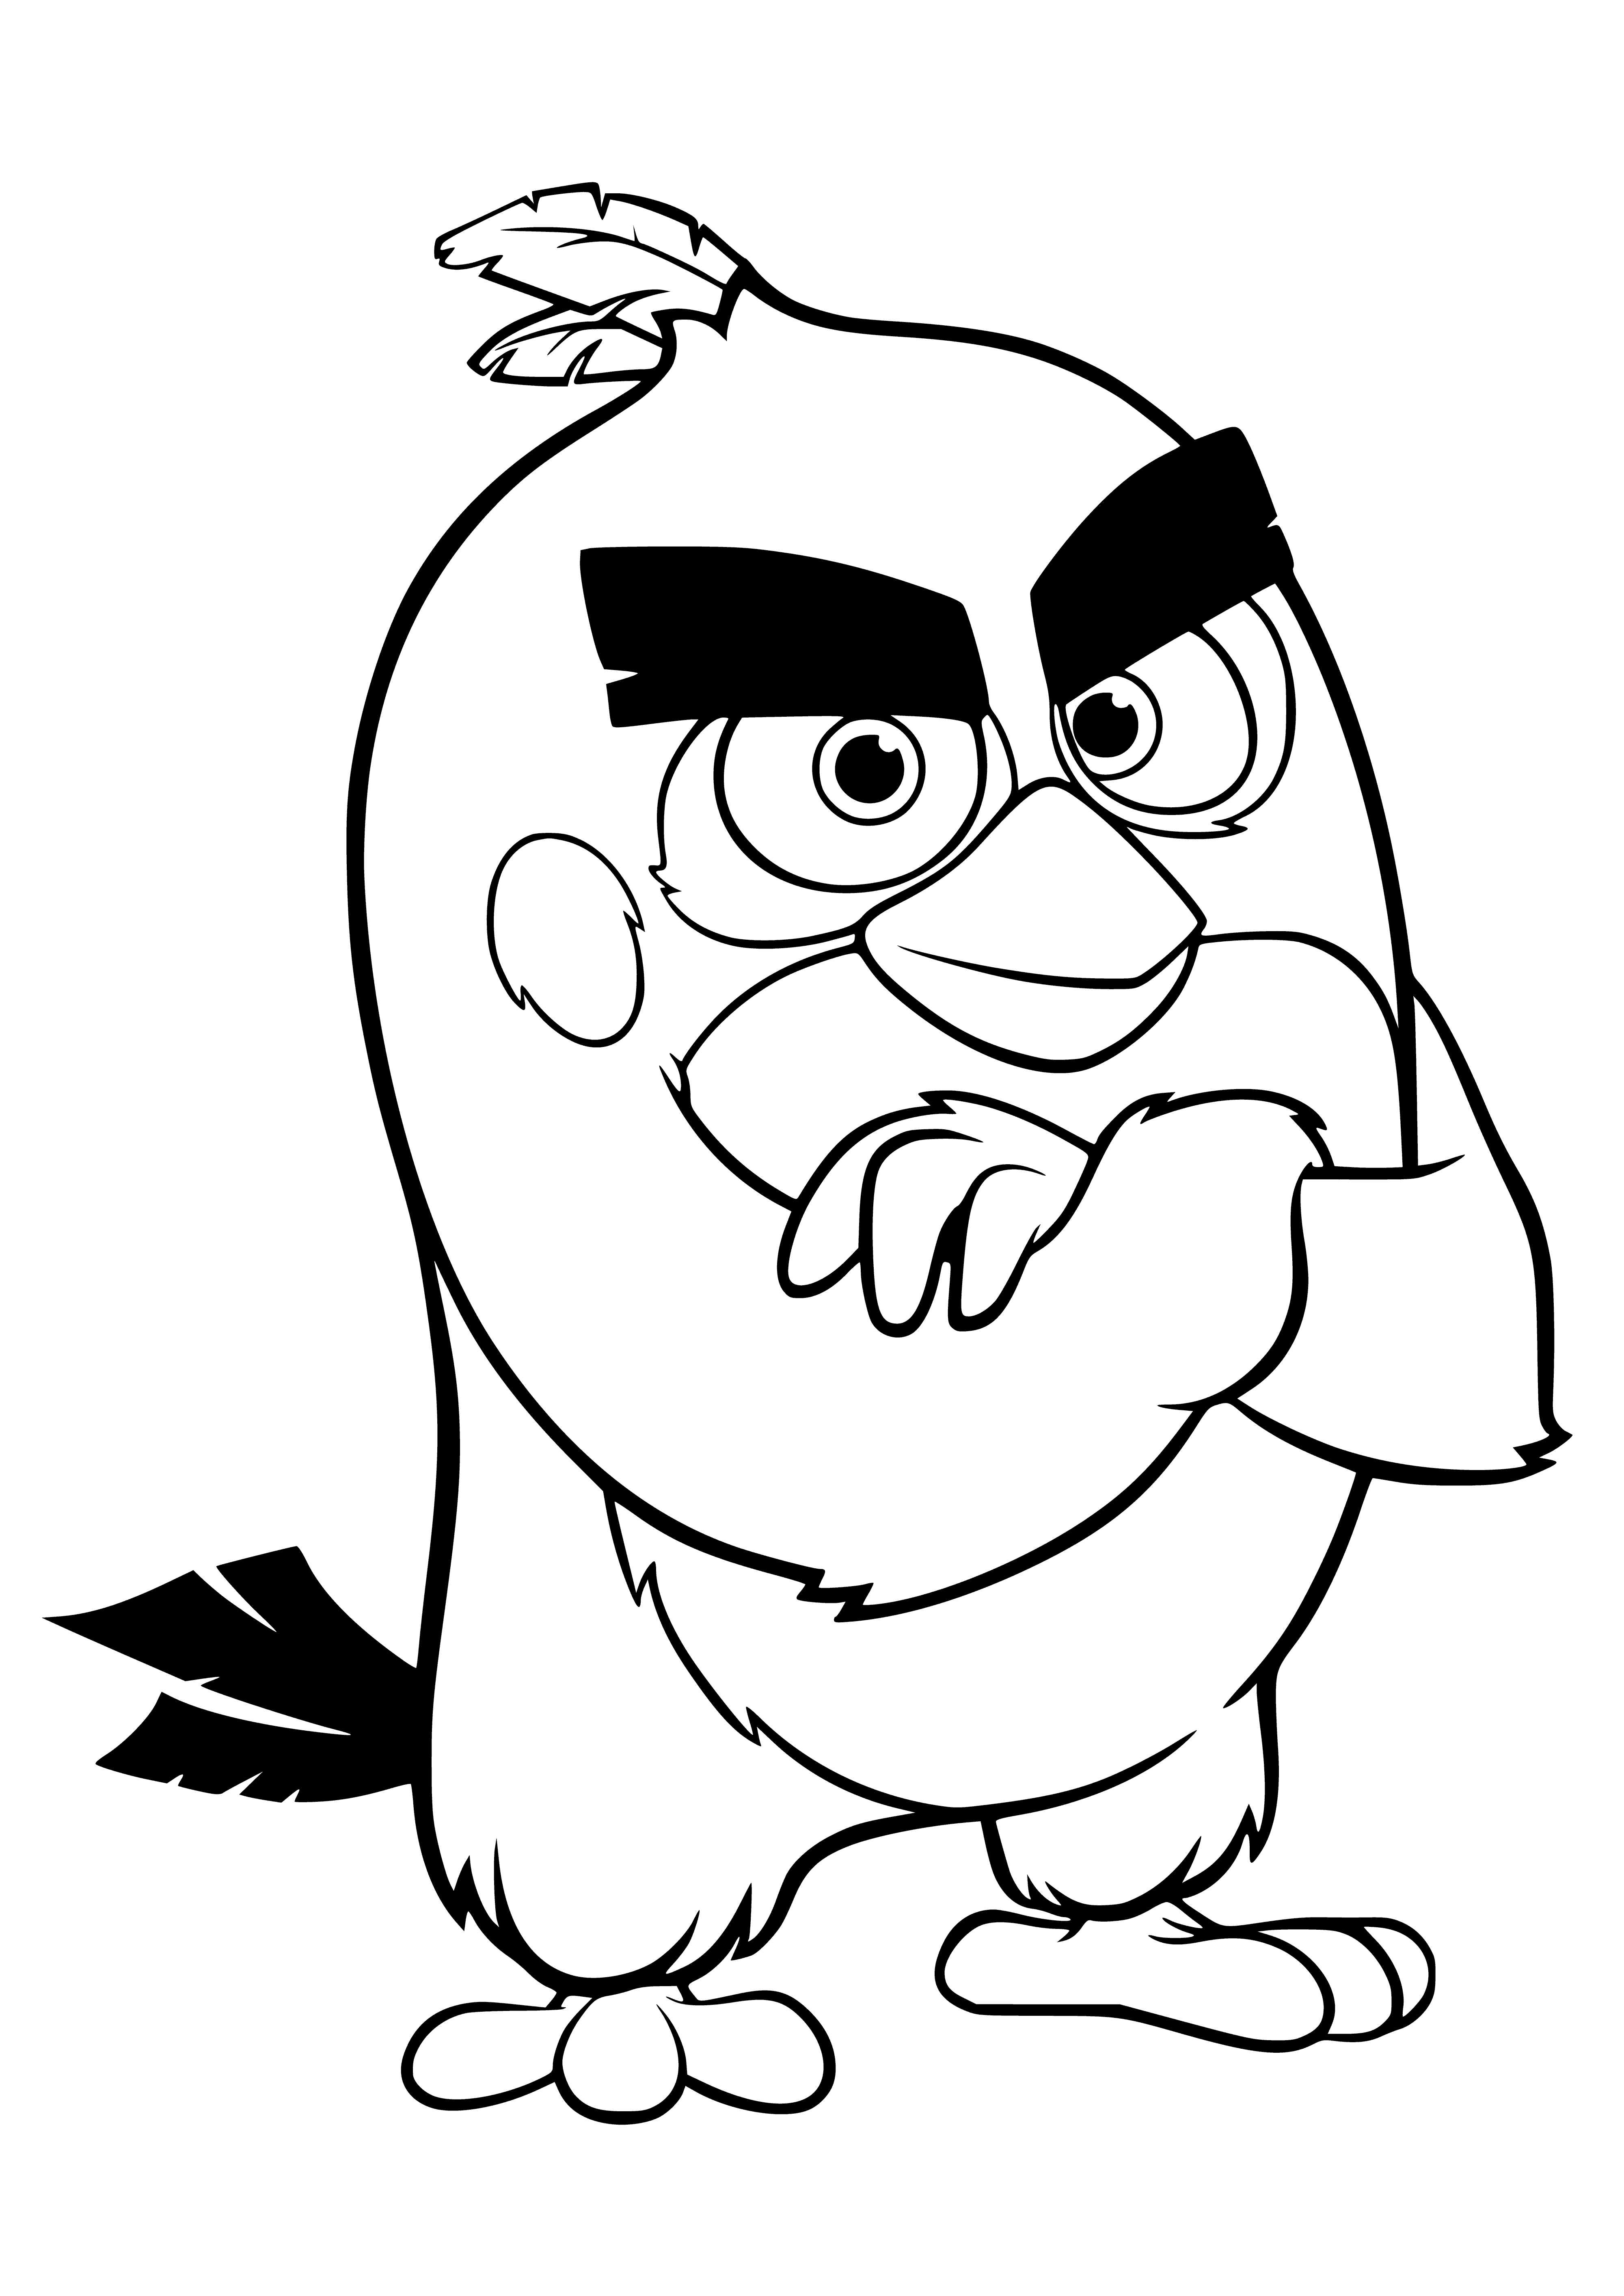 coloring page: The Angry Birds - Red Bird is a small, chubby bird with a red body, yellow beak, small black eyes and white eyebrows. Main character in the game.